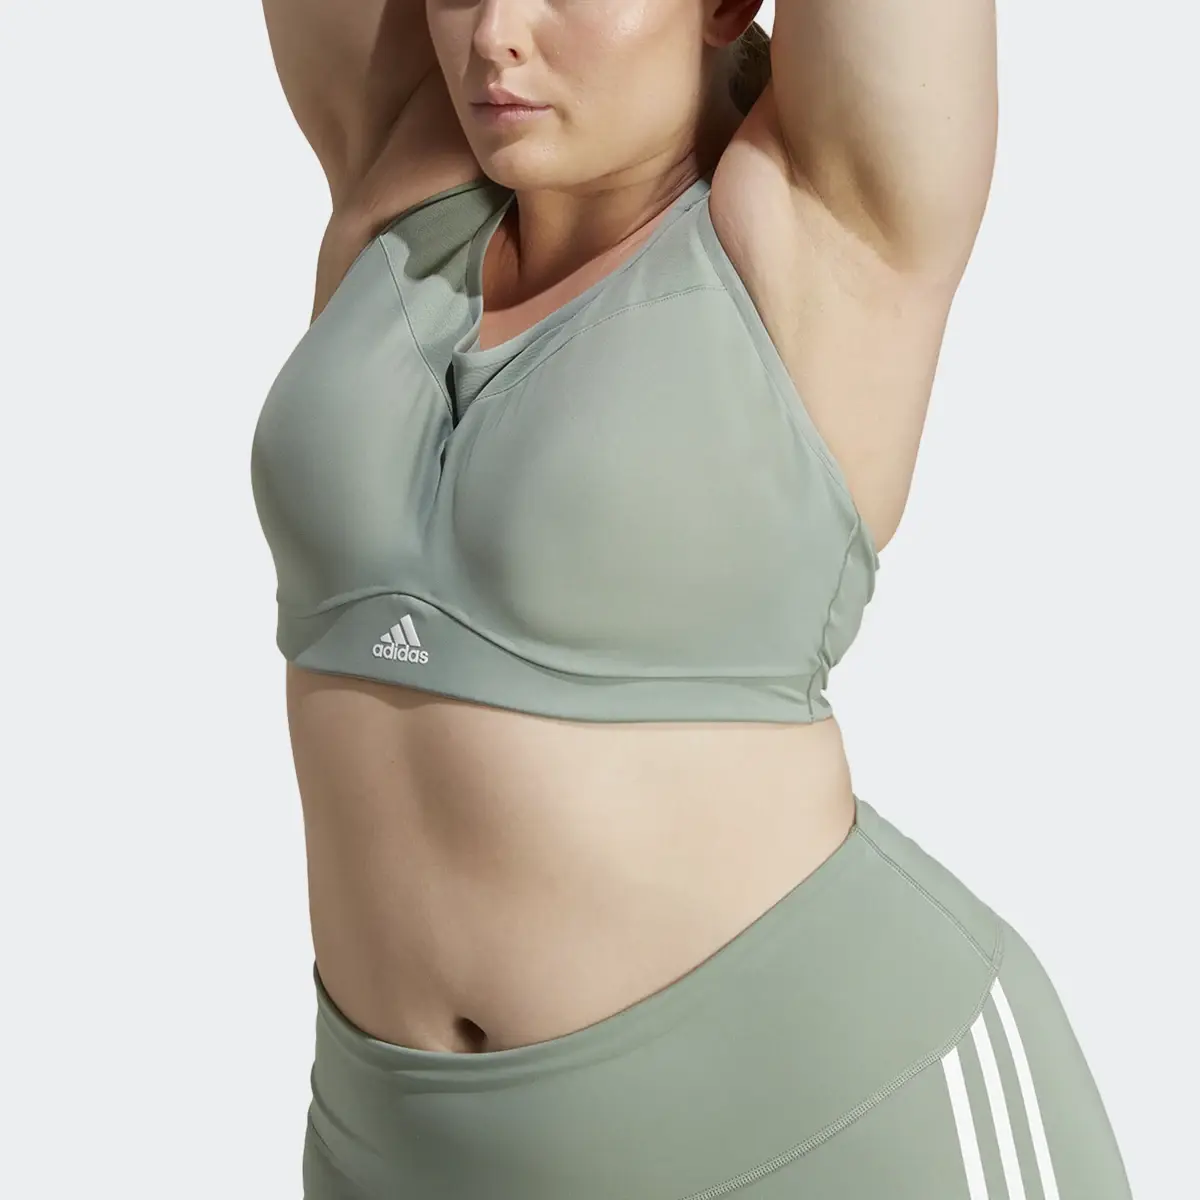 Adidas Brassière adidas TLRD Impact Training Maintien fort (Grandes tailles). 1